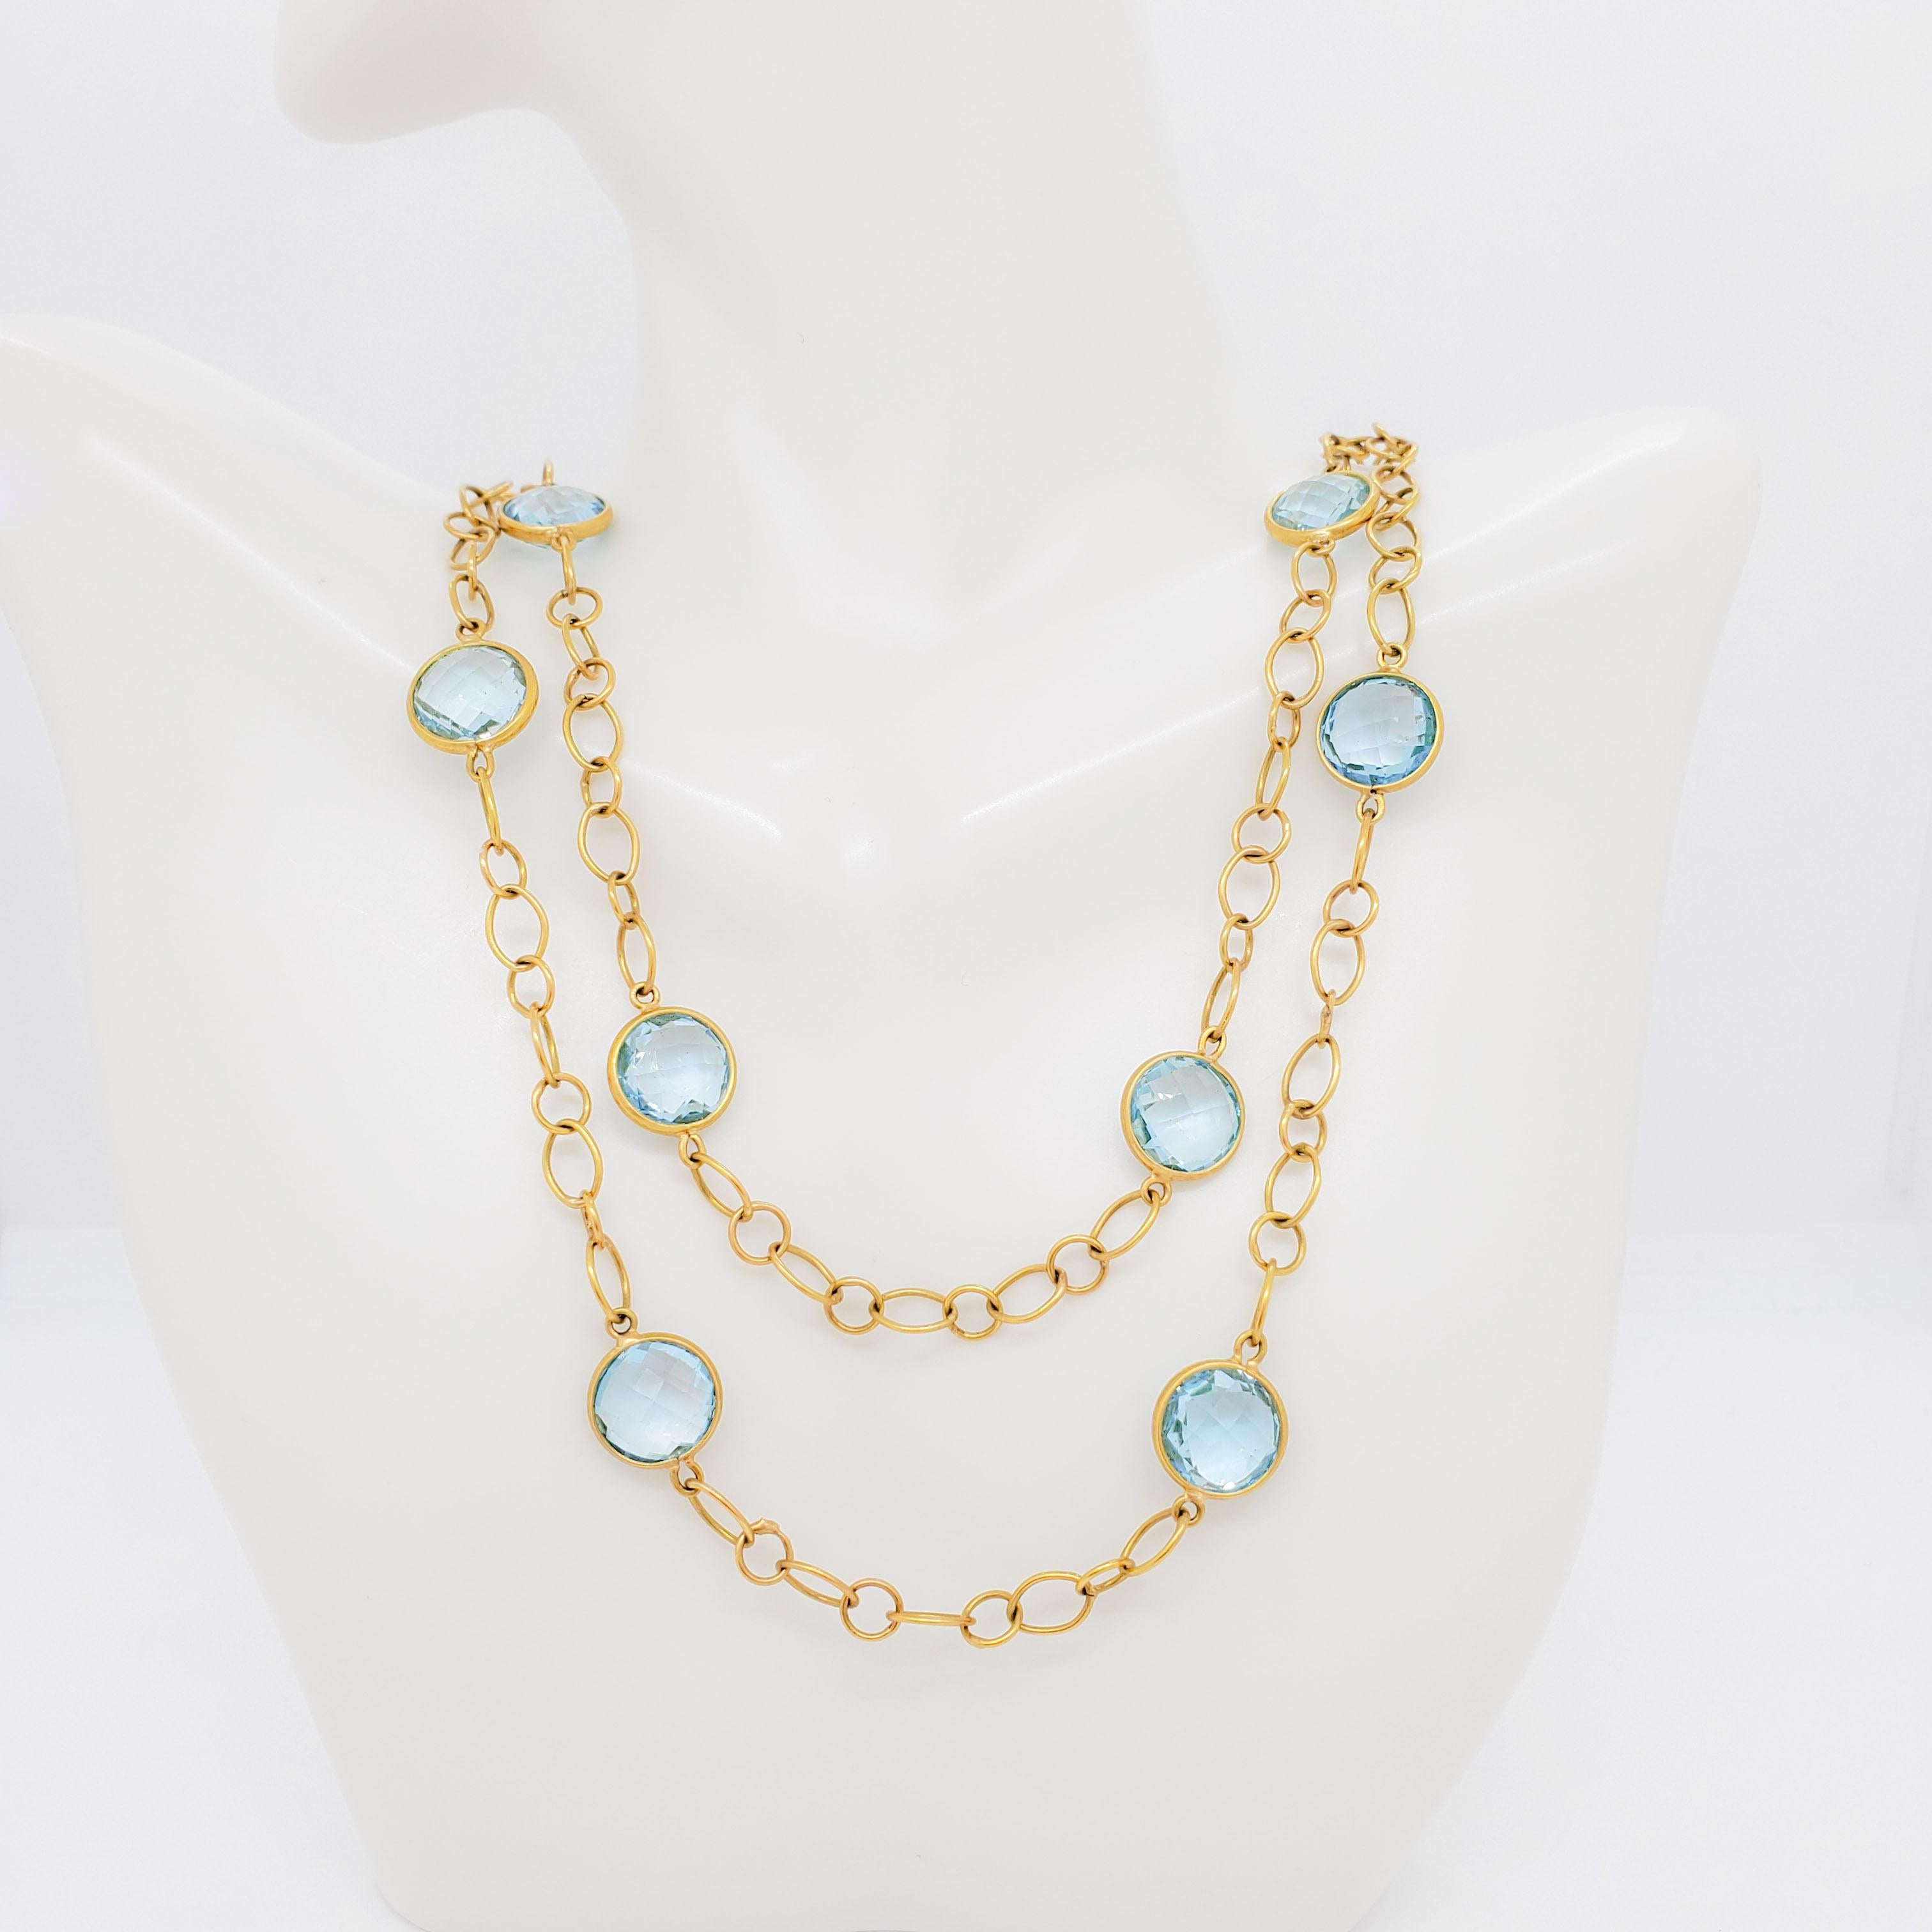 Gorgeous blue topaz rounds in handmade 18k yellow gold bezels and chain.  Length is 36